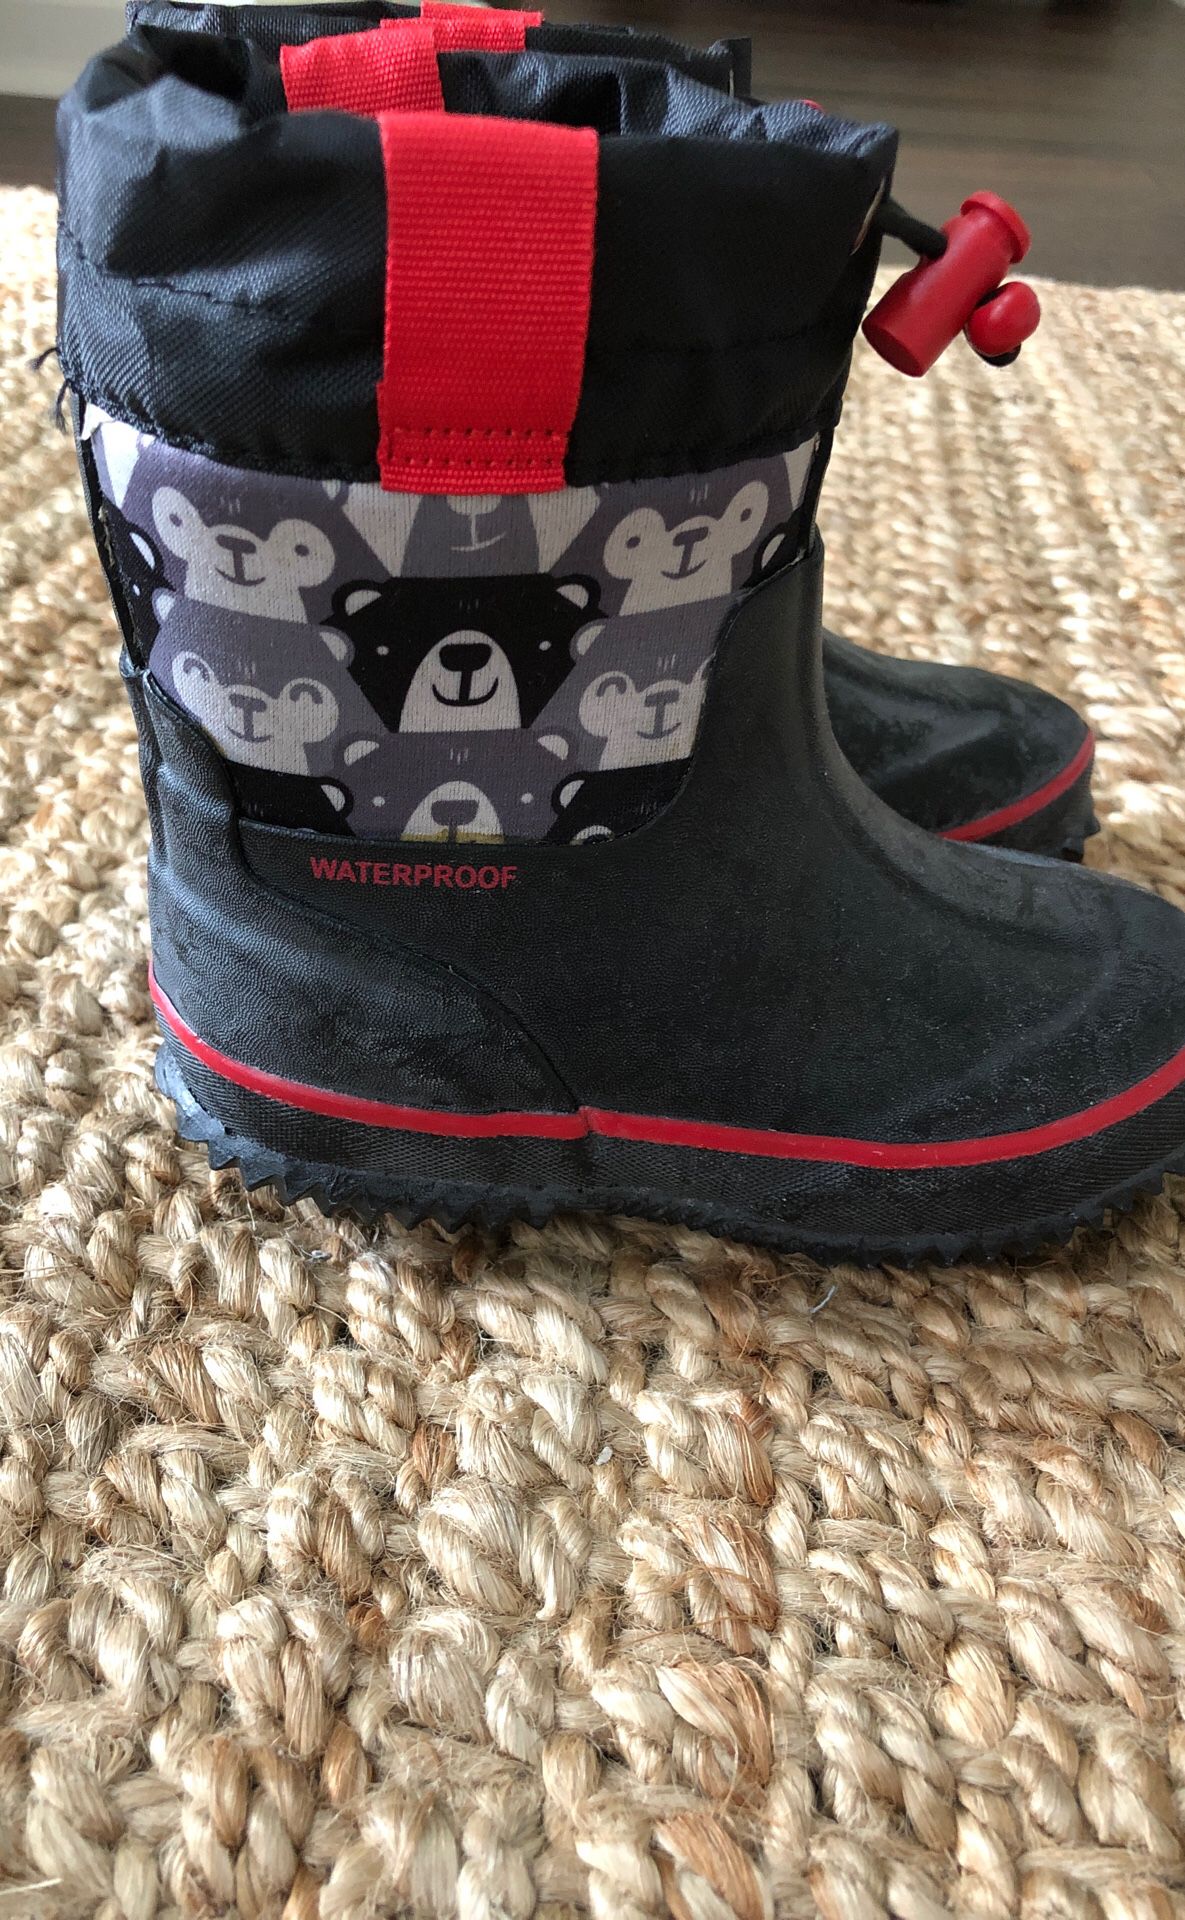 Rain and snow boots